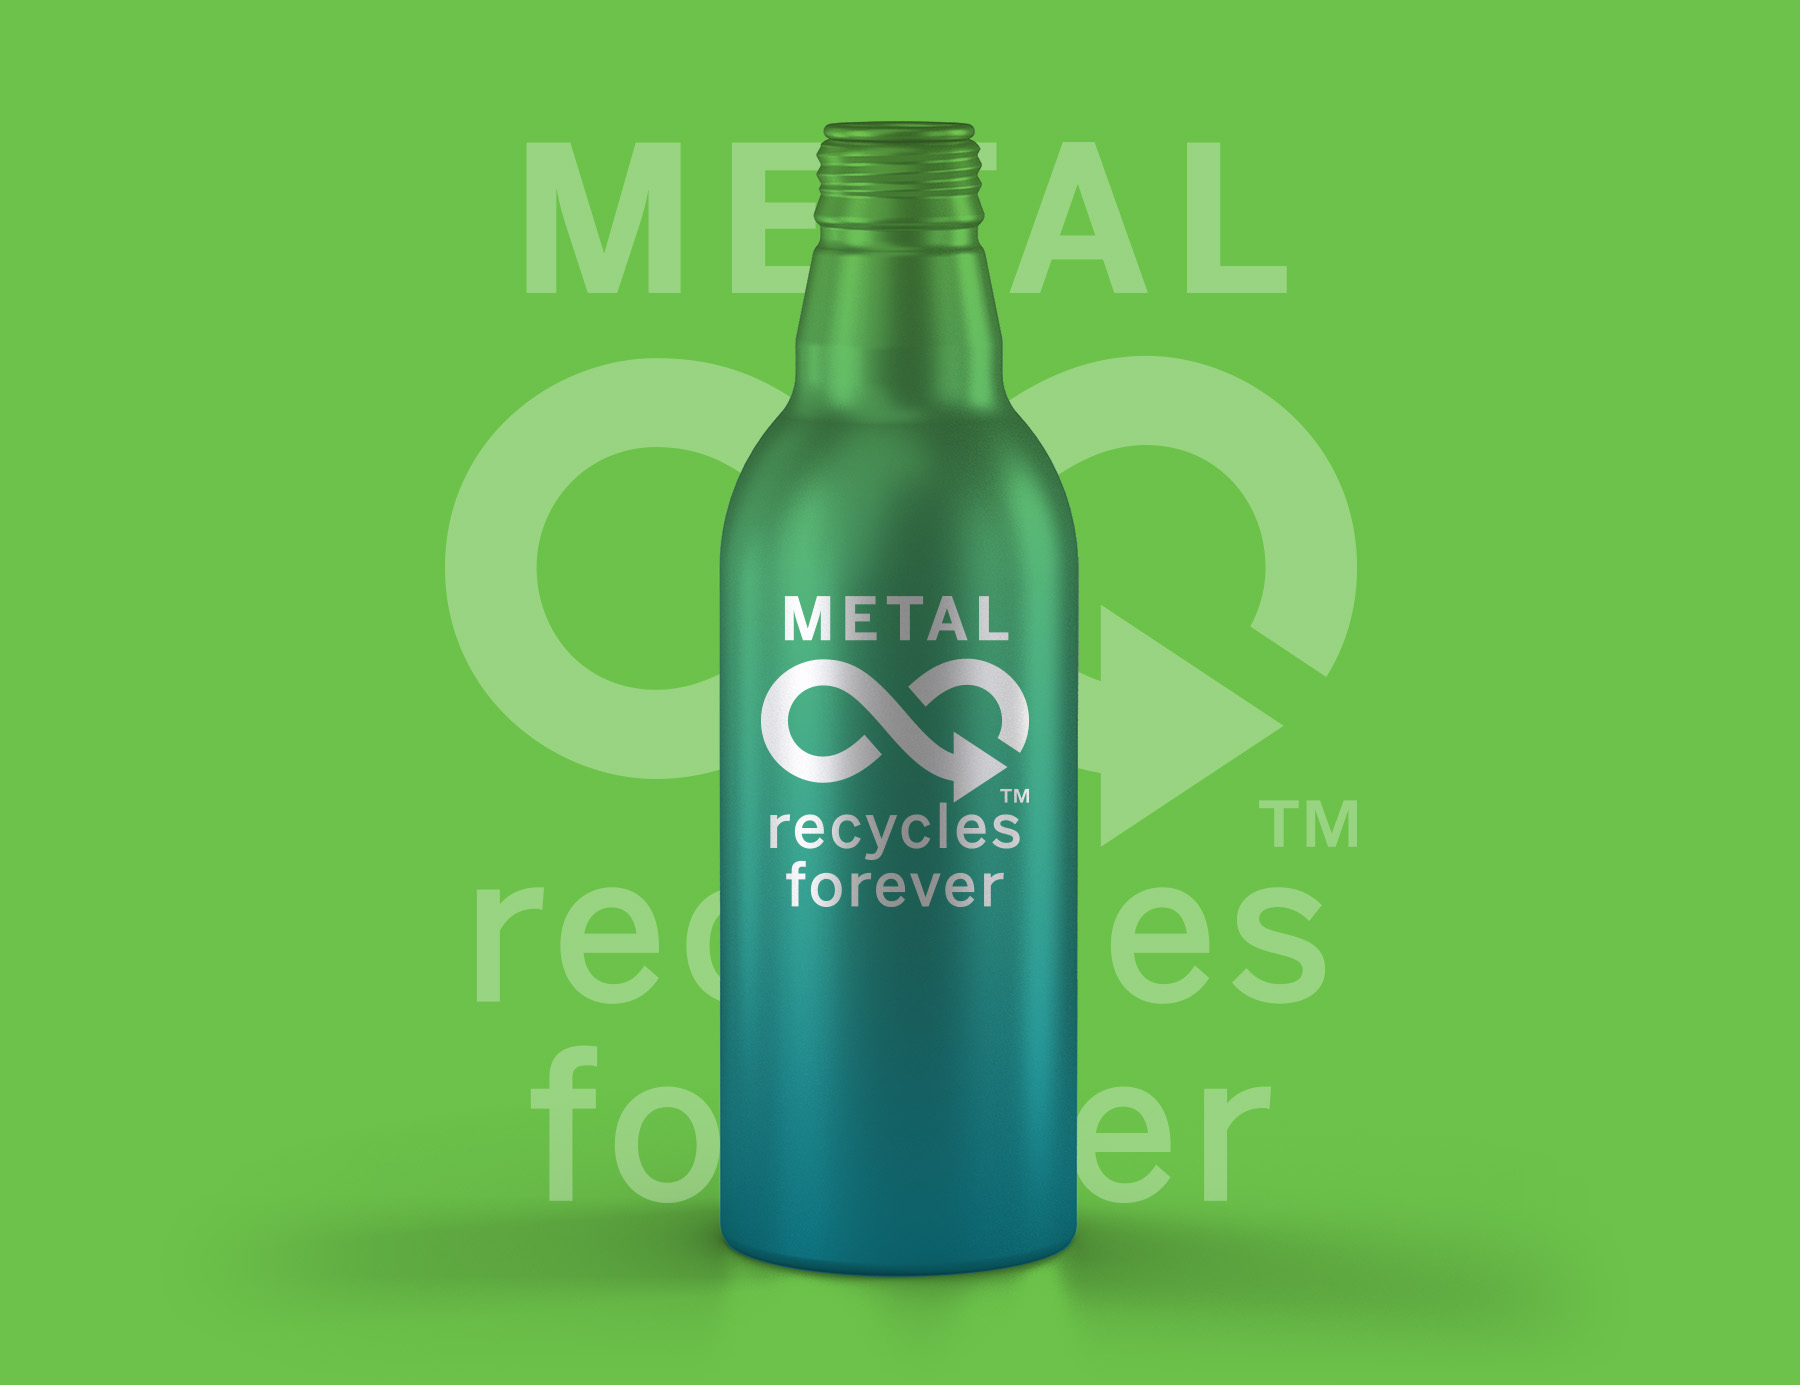 A metal bottle with the 'Metal Recycles Forever' logo printed on it